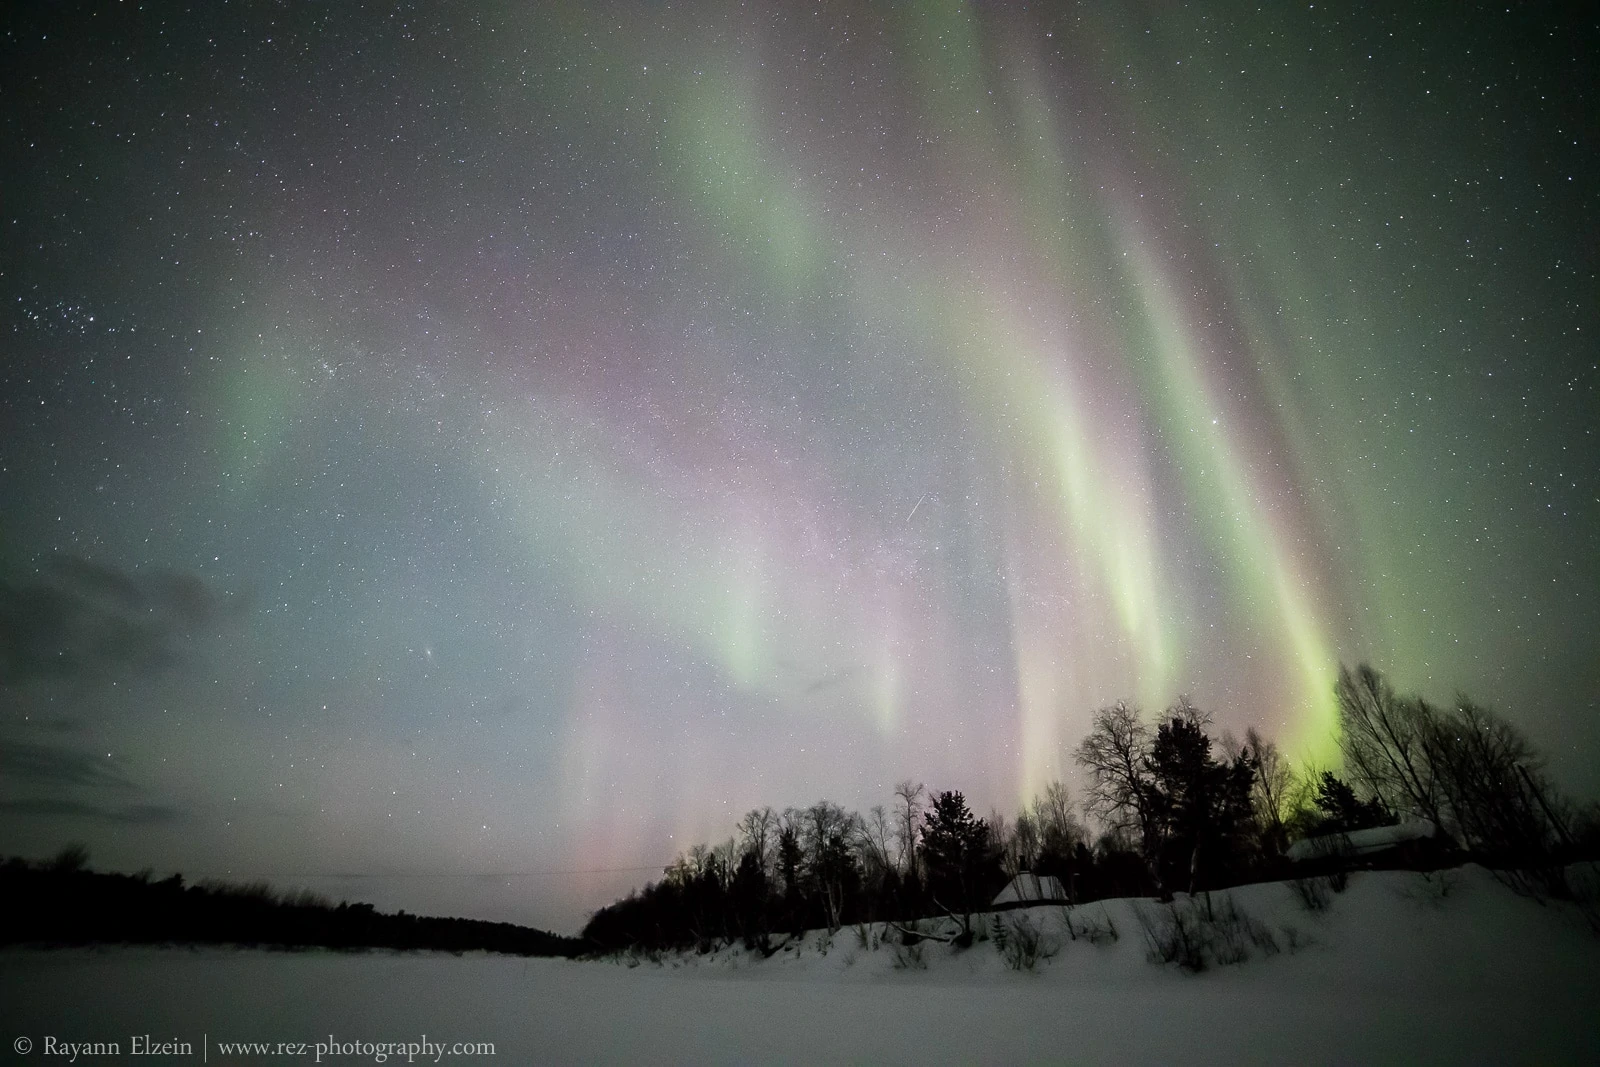 Sleepless night with the Northern Lights in Lapland